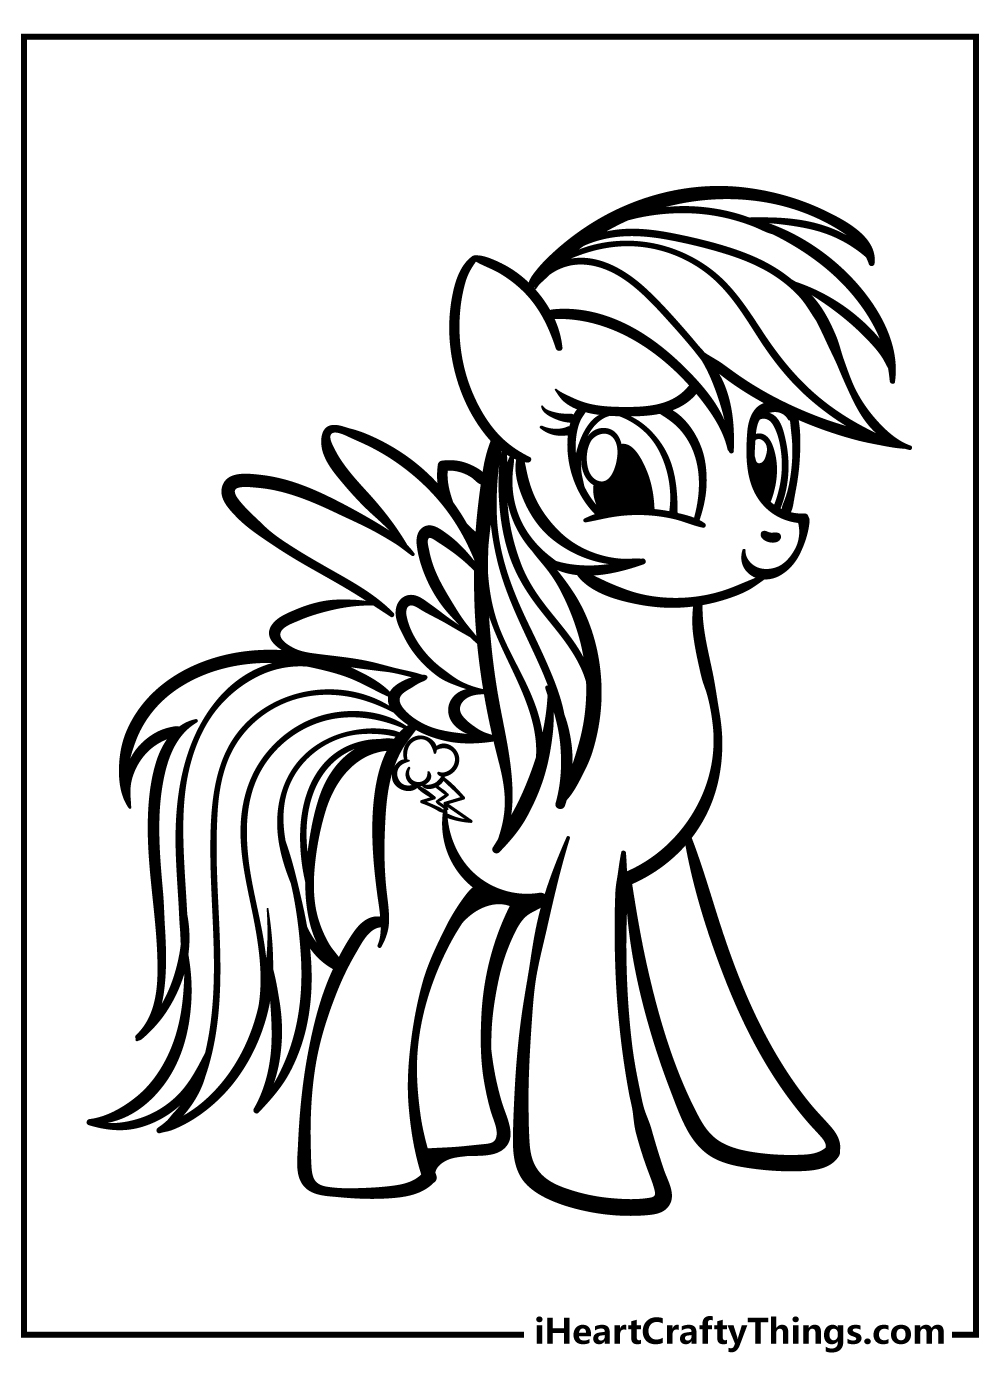 Rainbow Dash Coloring Pages for kids free download